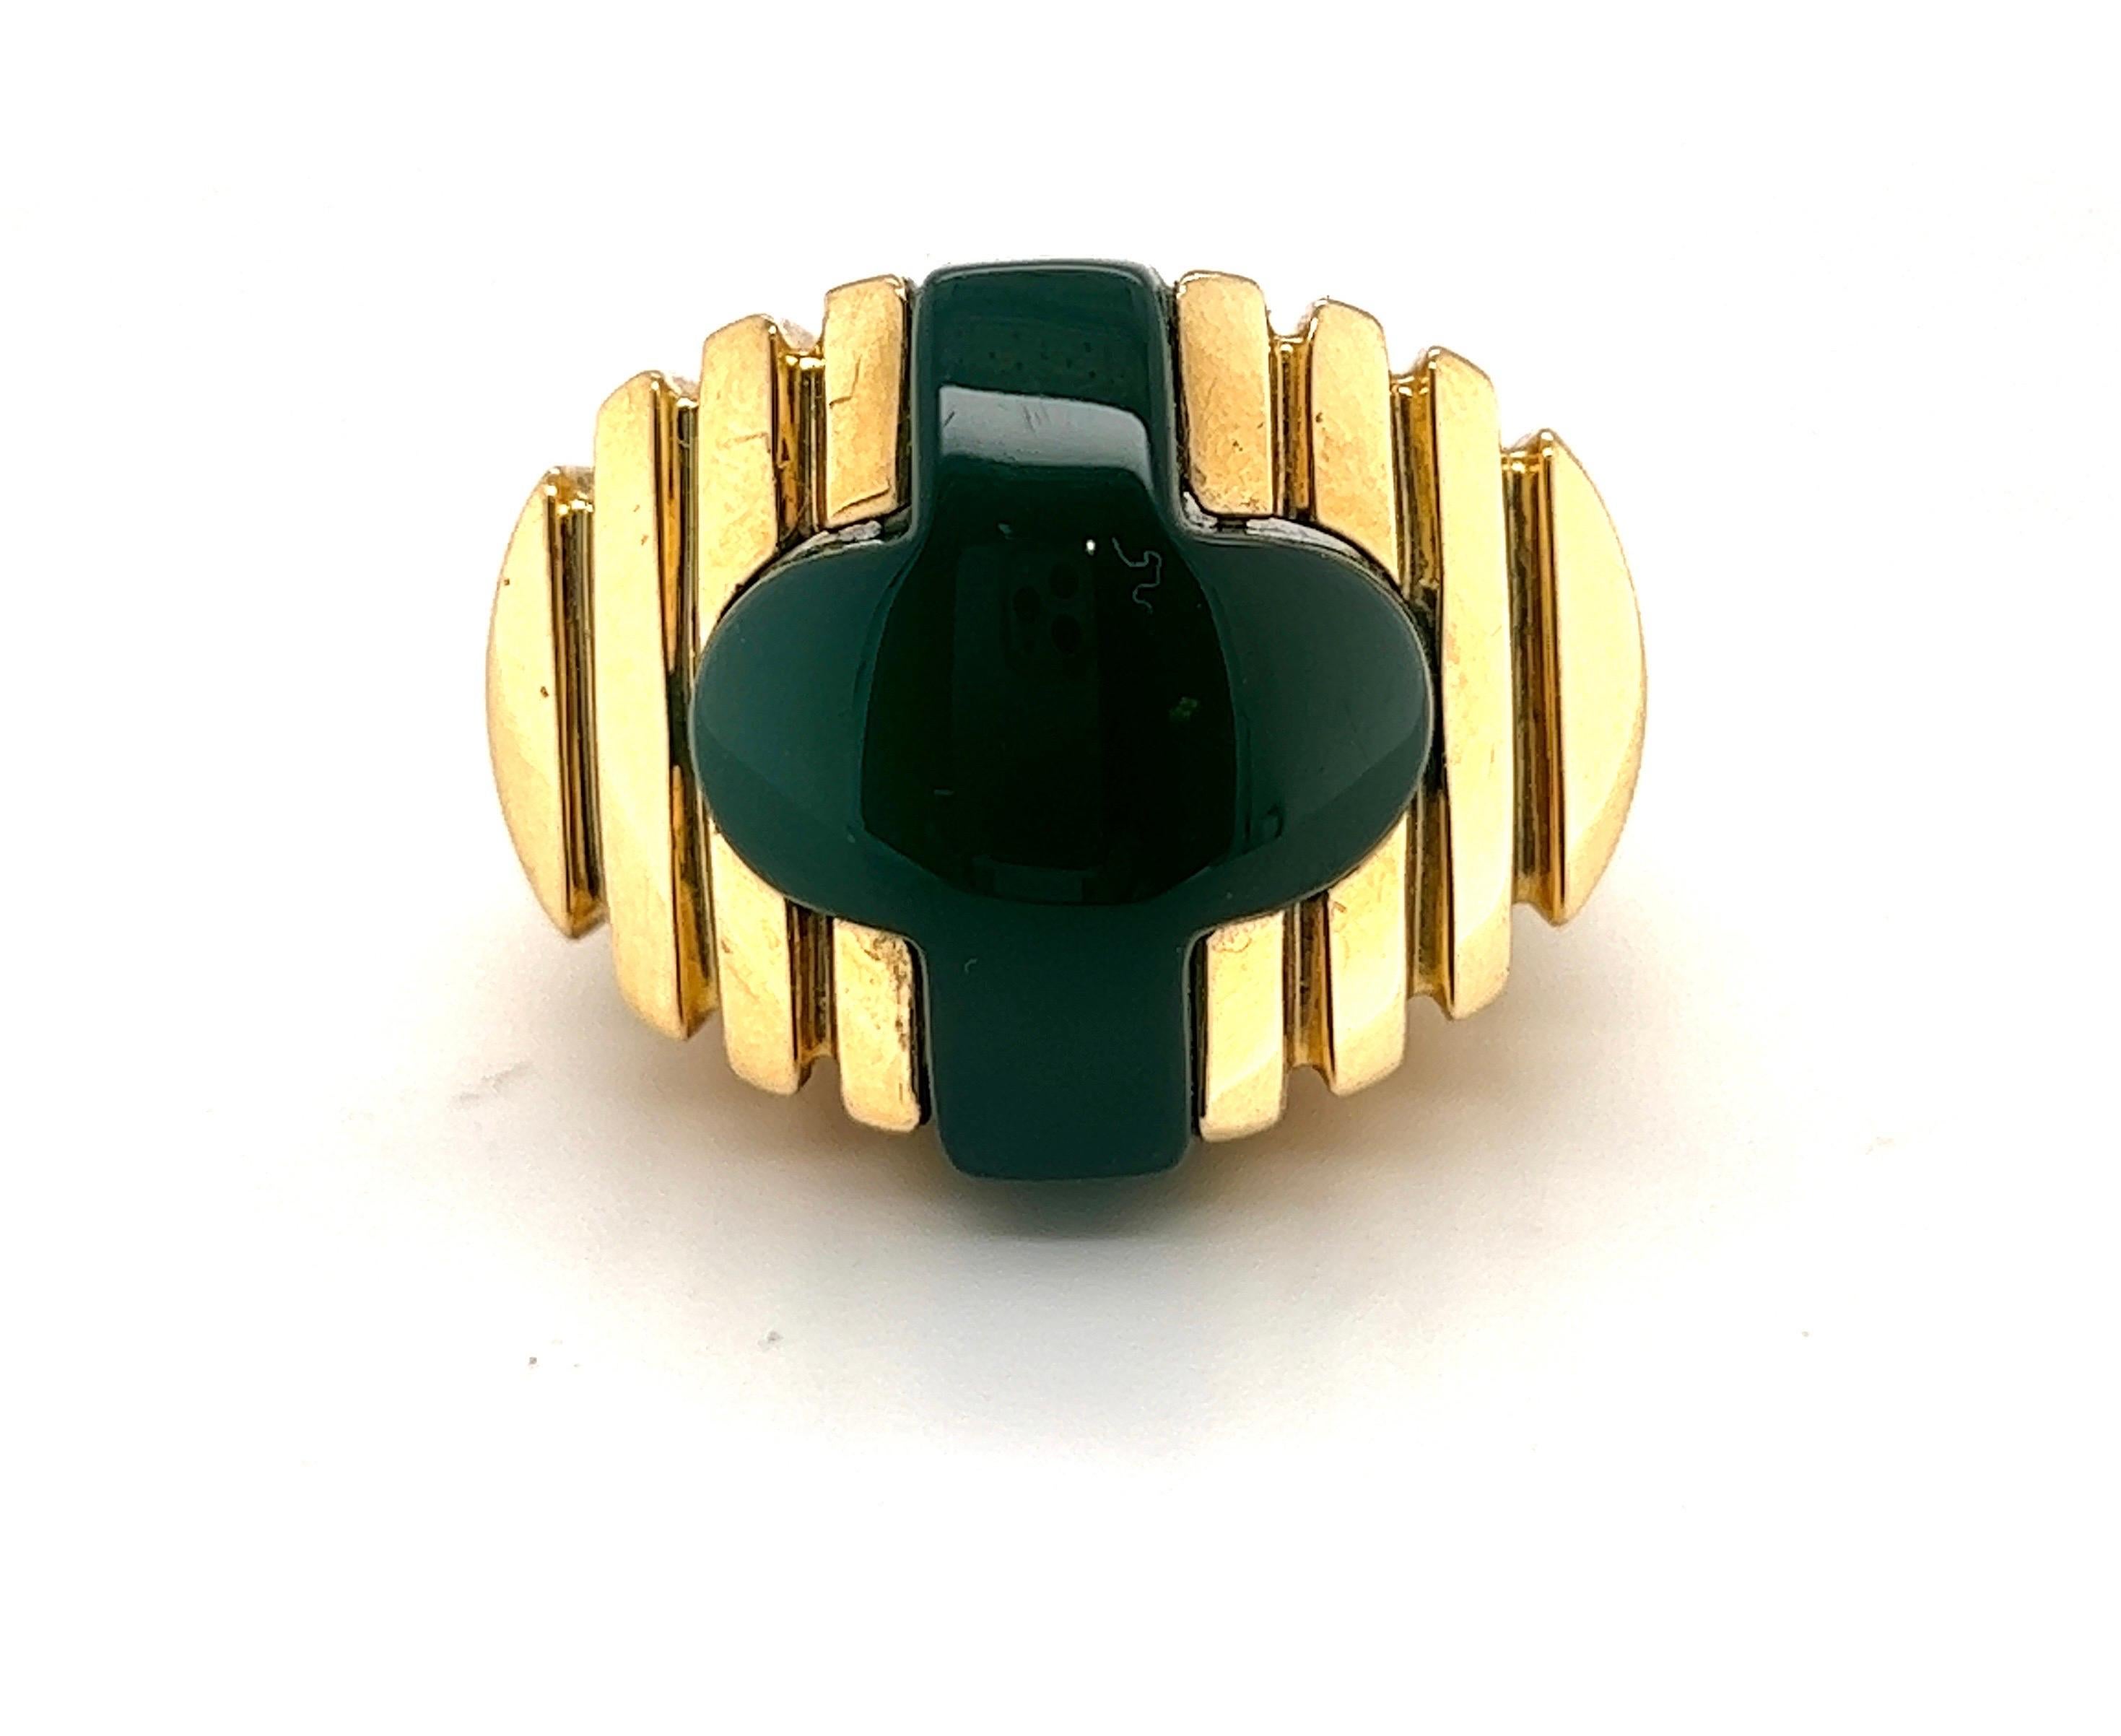 Mixed Cut Cartier Aldo Cipullo 18 Karat Yellow Gold and Green Agate Cocktail Ring, 1971